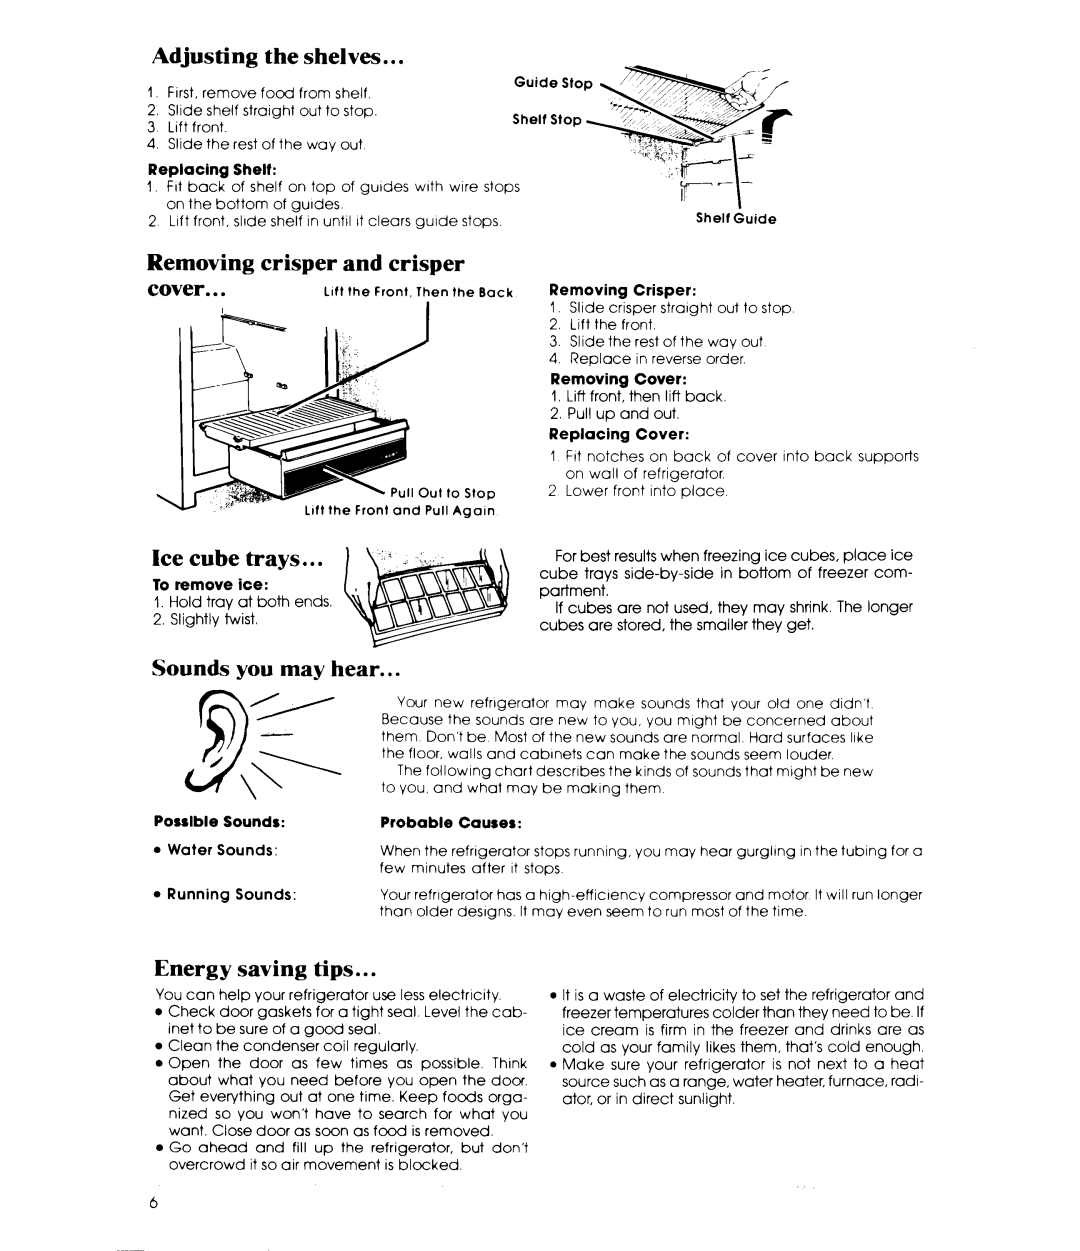 Whirlpool ELl5CCXR manual k--l, Adjusting the shelves, Removing crisper and crisper, Ice cube trays, Sounds you may hear 